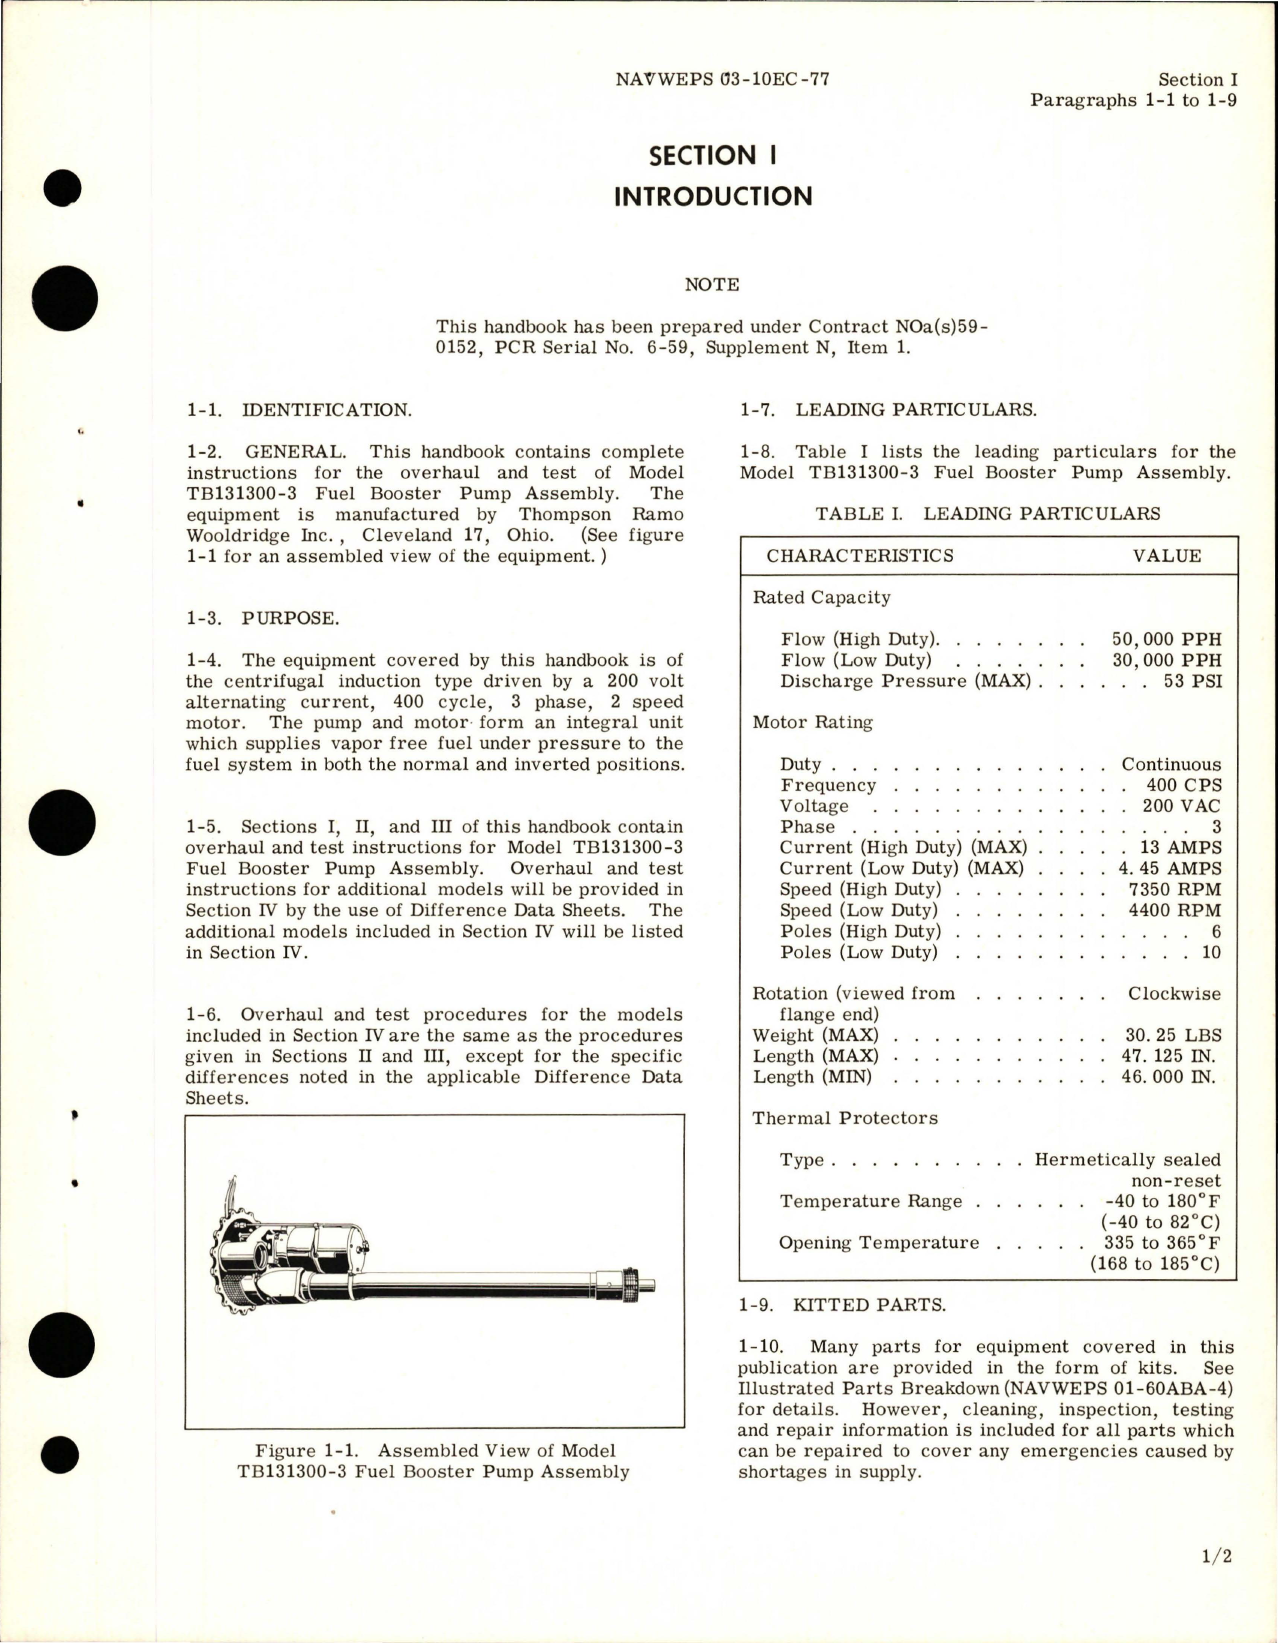 Sample page 5 from AirCorps Library document: Overhaul Instructions for Fuel Booster Pump - Models TB131300-3 